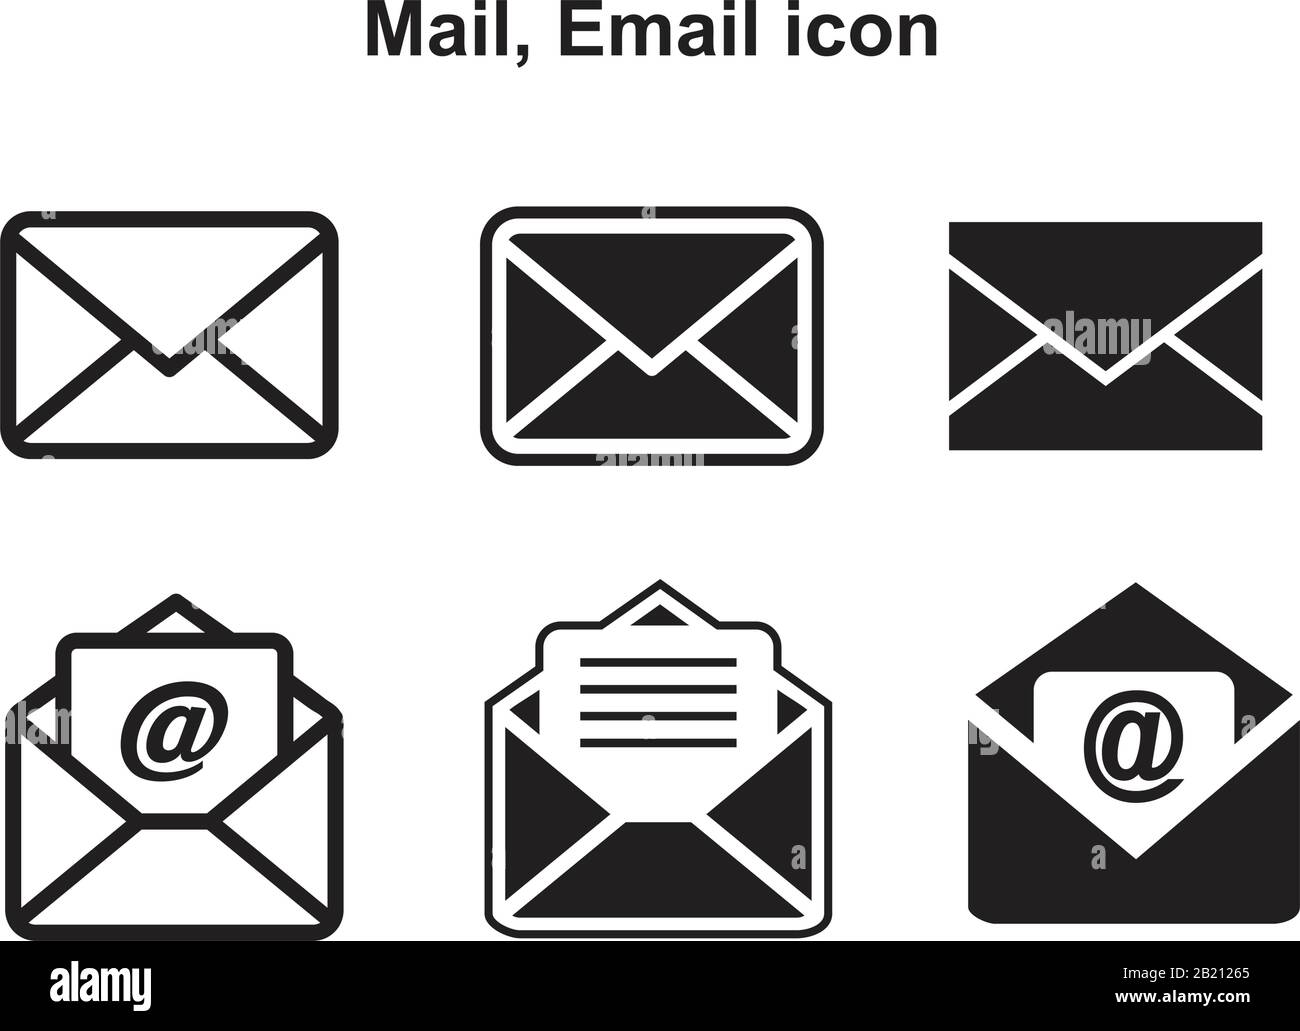 https://c8.alamy.com/comp/2B21265/mail-email-icon-template-black-color-editable-mail-email-icon-symbol-flat-vector-illustration-for-graphic-and-web-design-2B21265.jpg